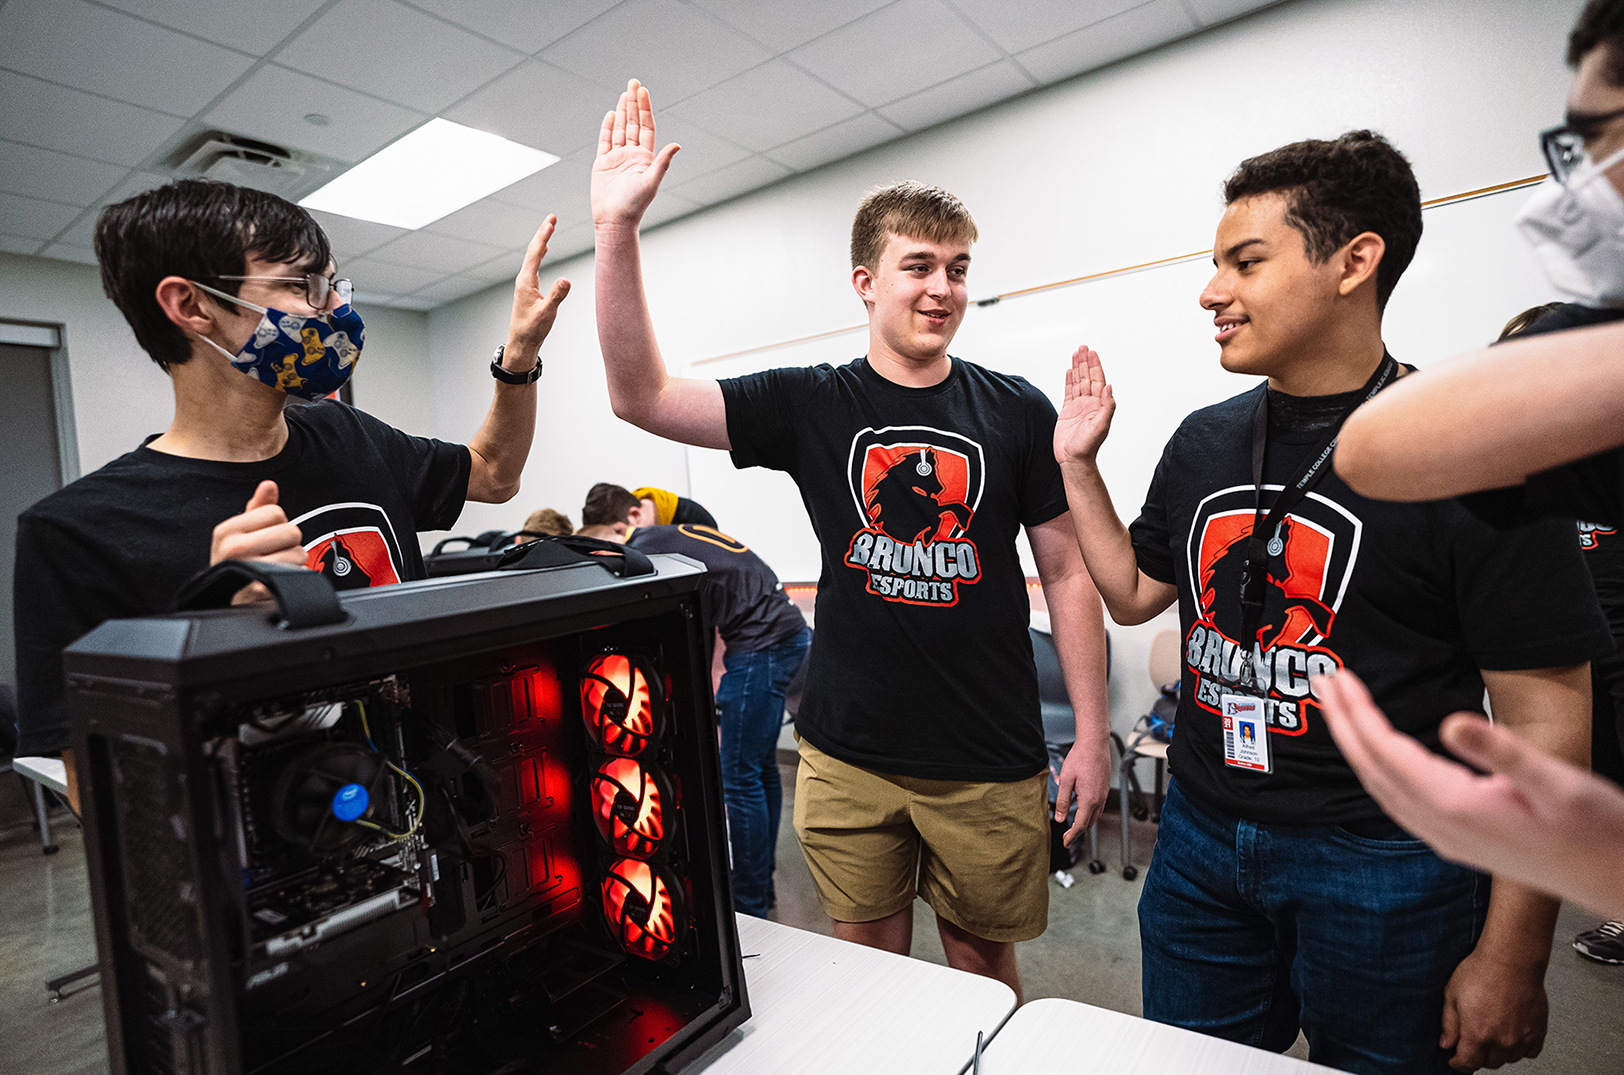 Esports startup closes $19M Series B, solidifying position as scholastic esports leader